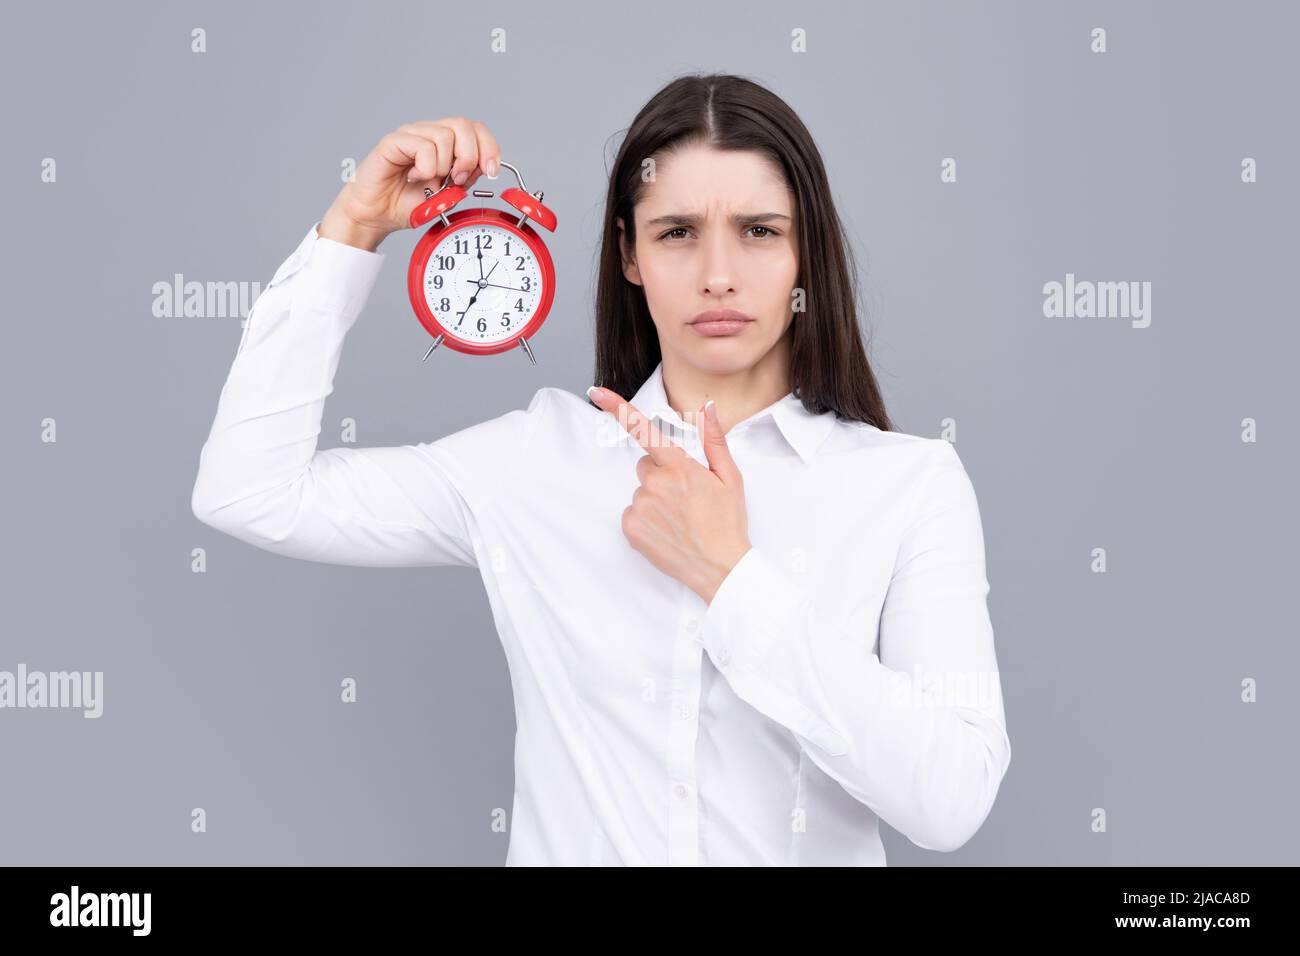 Surprised woman holding alarm watch. Isolated portrait. Stock Photo